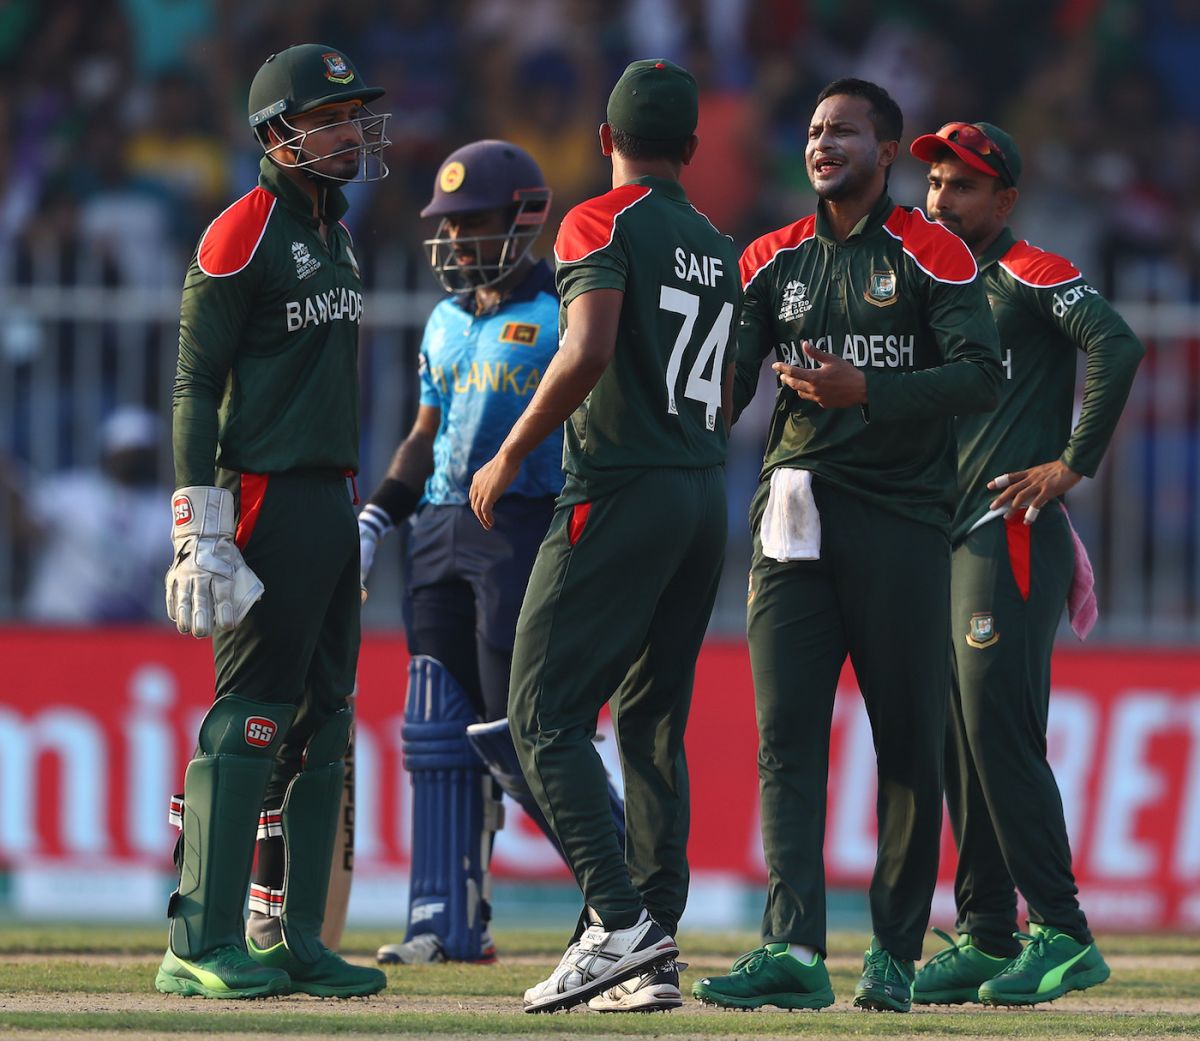 Shakib Al Hasan ended a big stand for the second wicket, Bangladesh vs Sri Lanka, T20 World Cup, Group 1, Sharjah, October 24, 2021